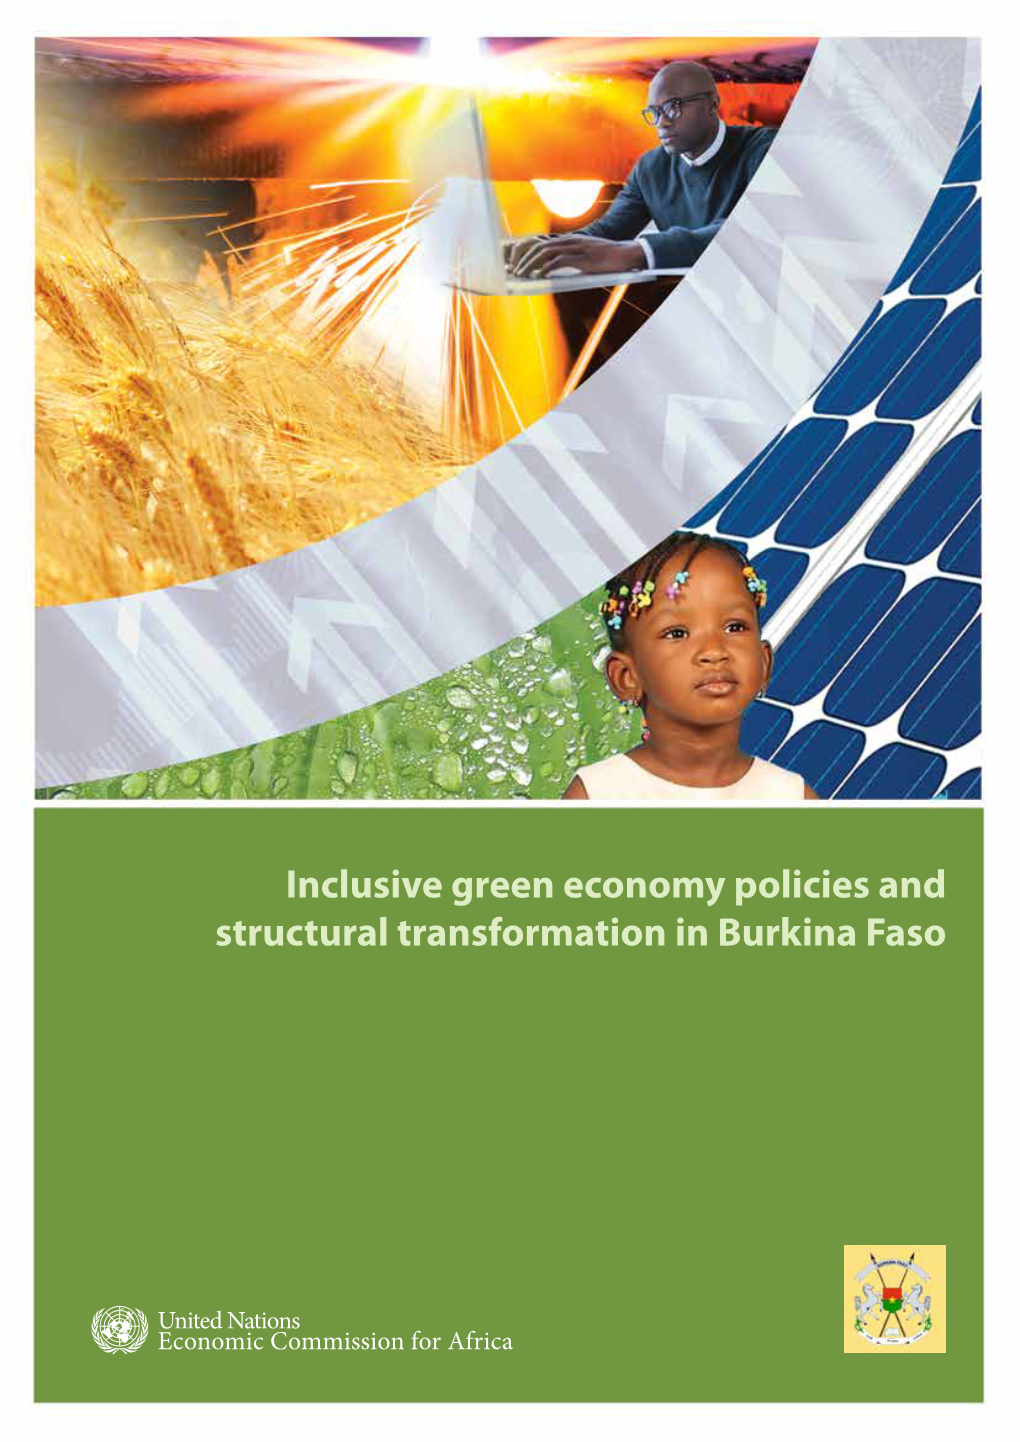 Inclusive Green Economy Policies and Structural Transformation in Burkina Faso